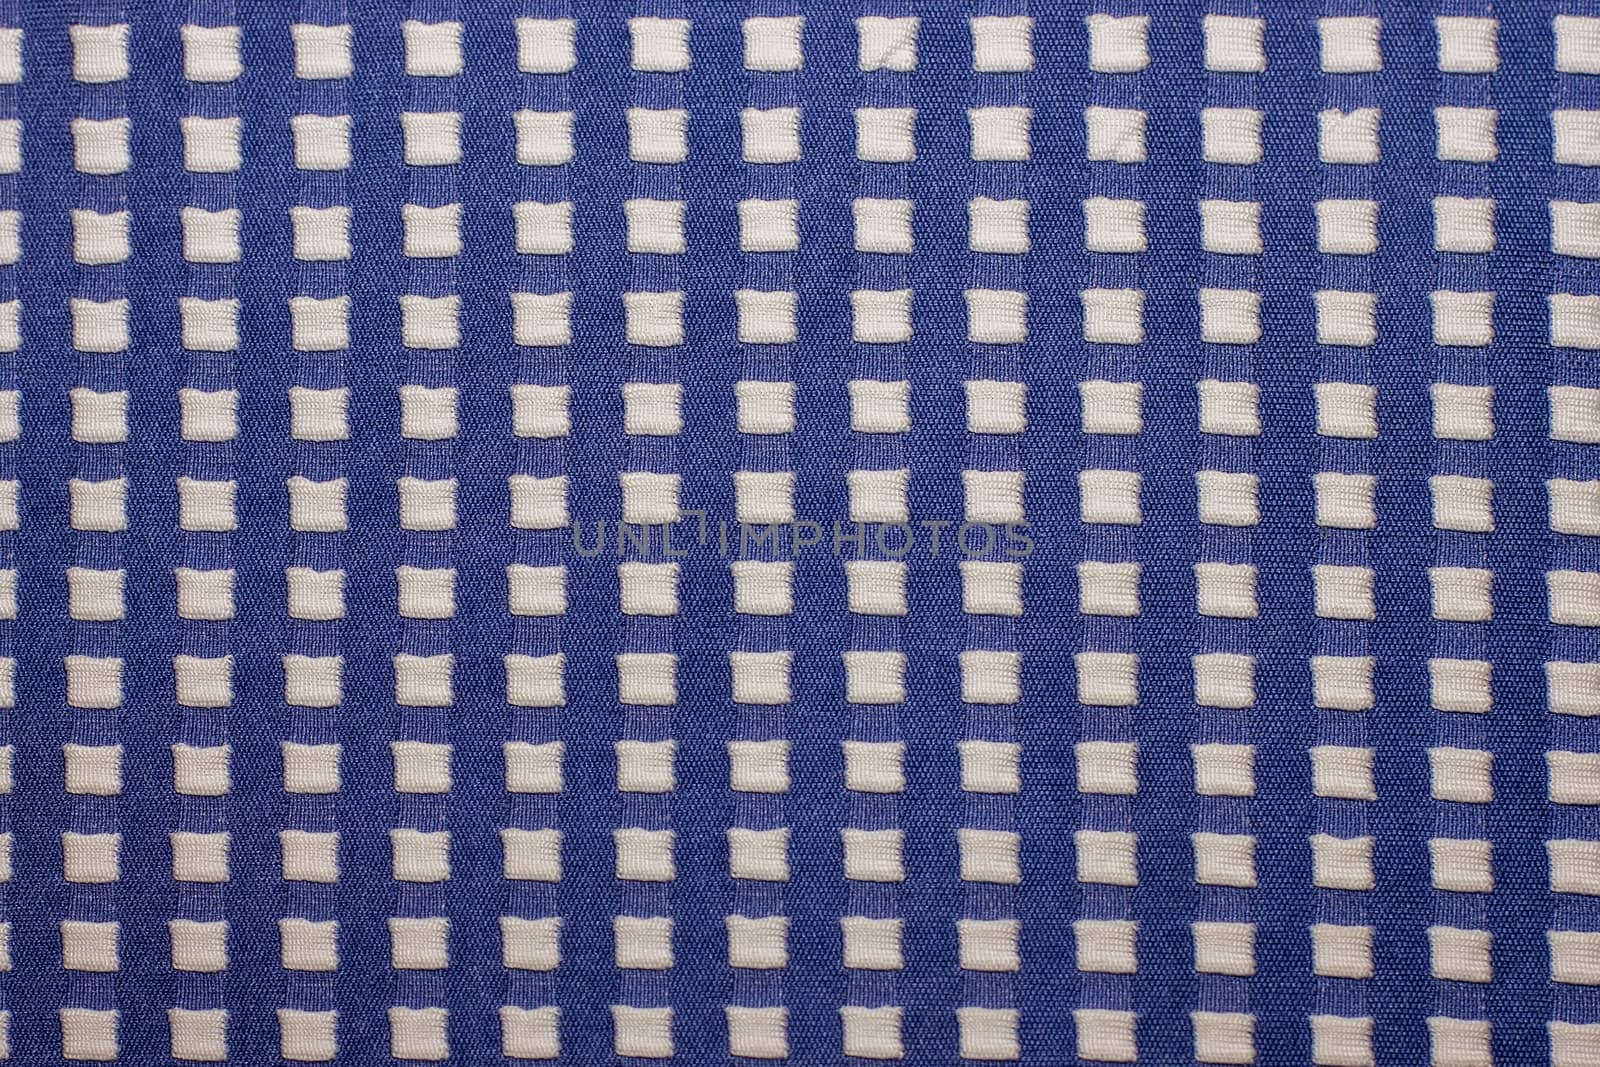 knitted fabric with square patterns, knitted wool textiles, warm clothes for winter fabrics for texture and background